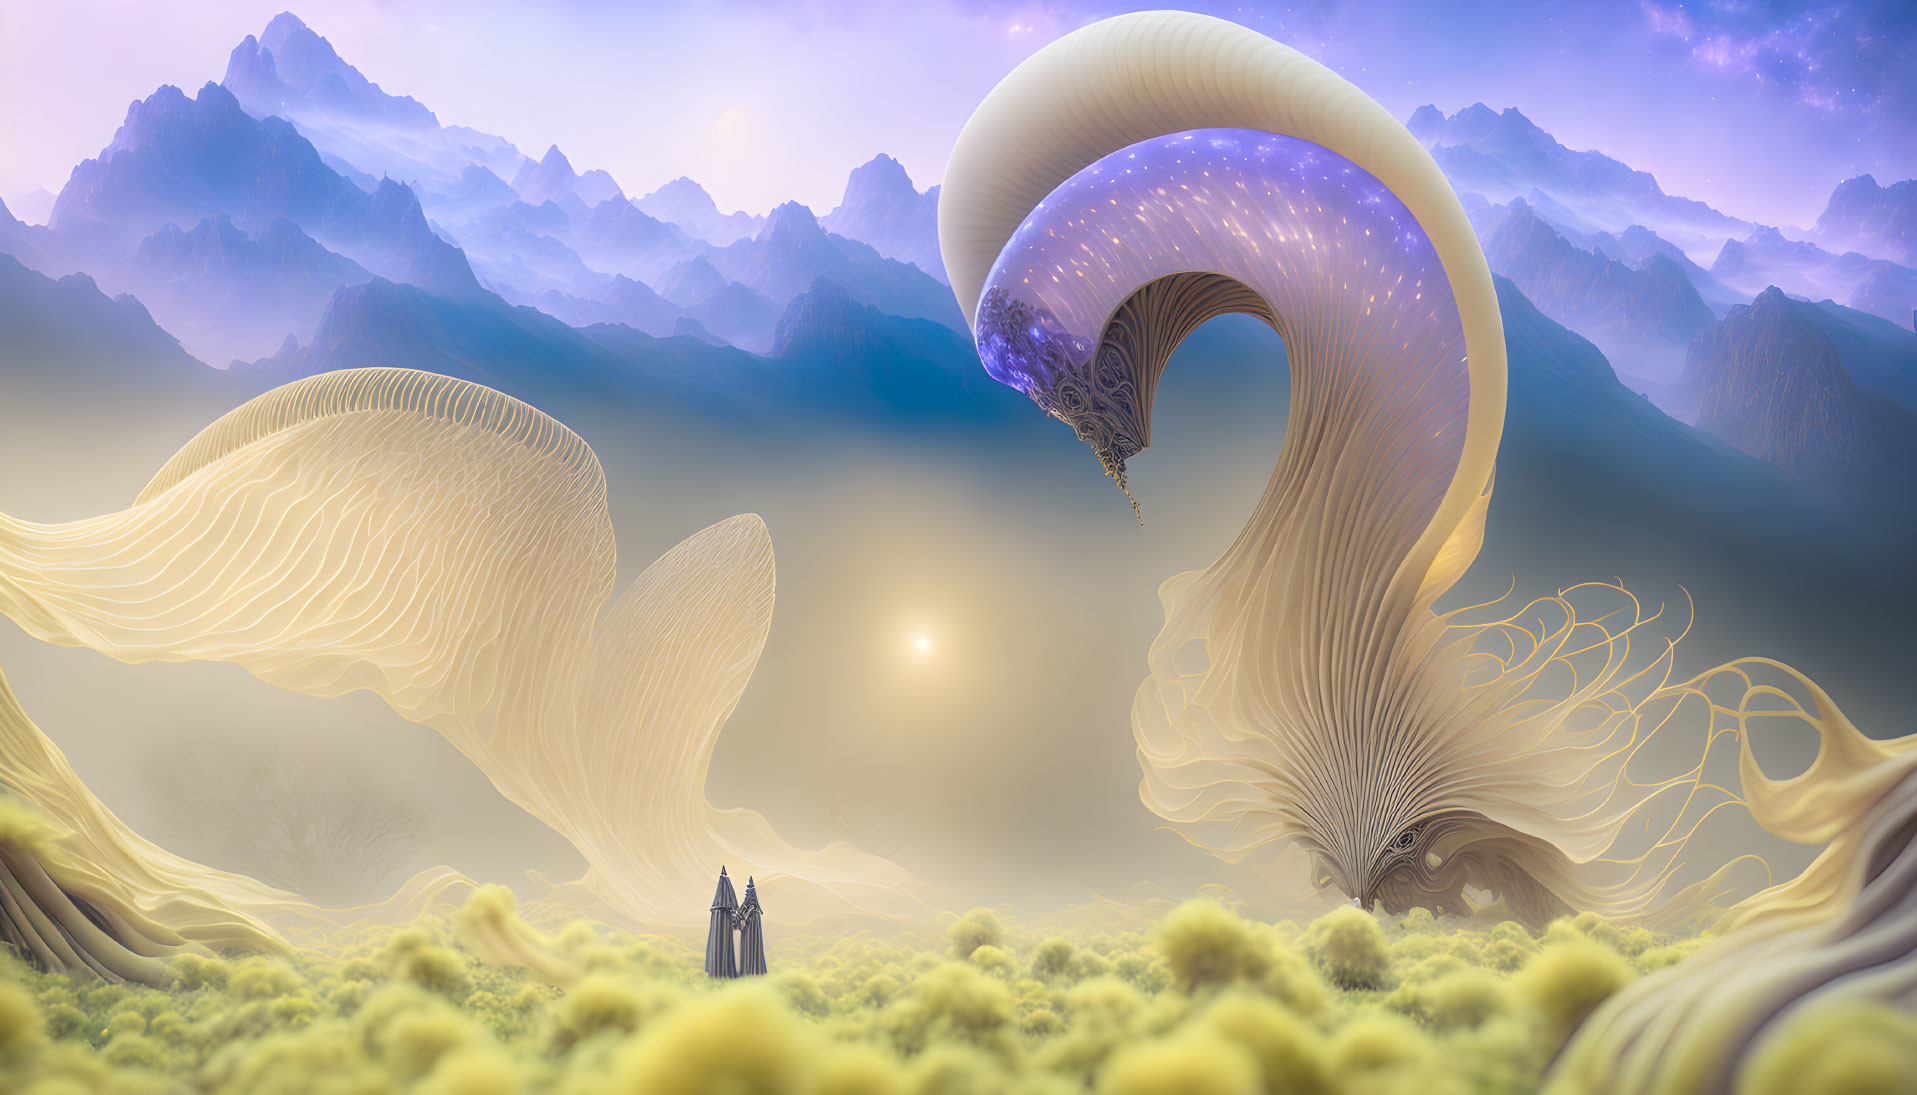 Fantastical landscape with floating jellyfish-like creatures above moss-covered ground.